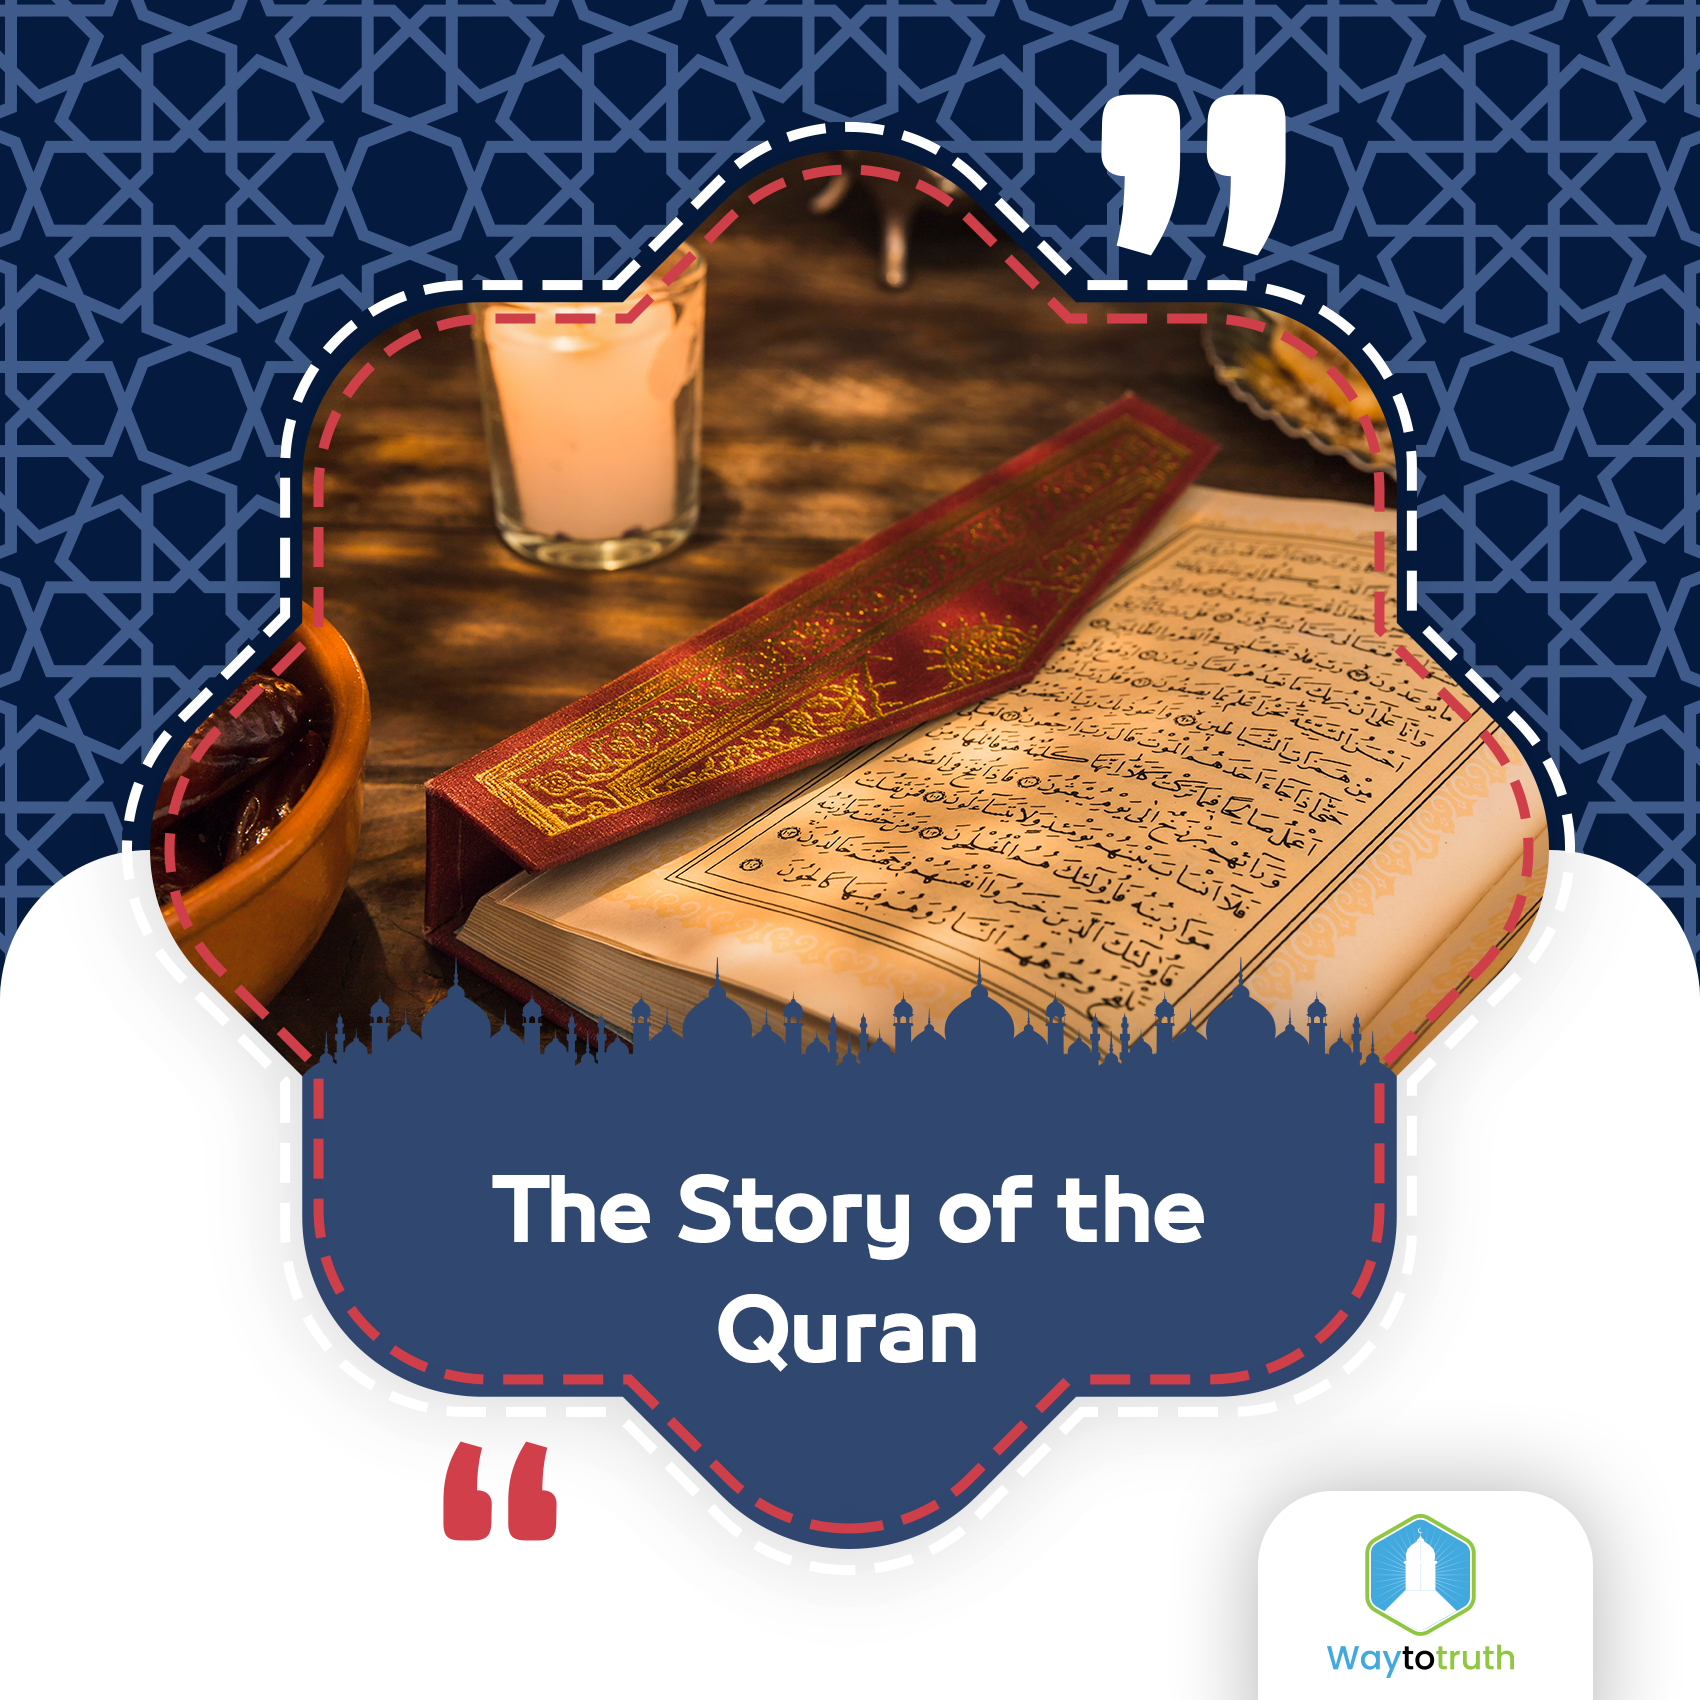 The Story of the Quran